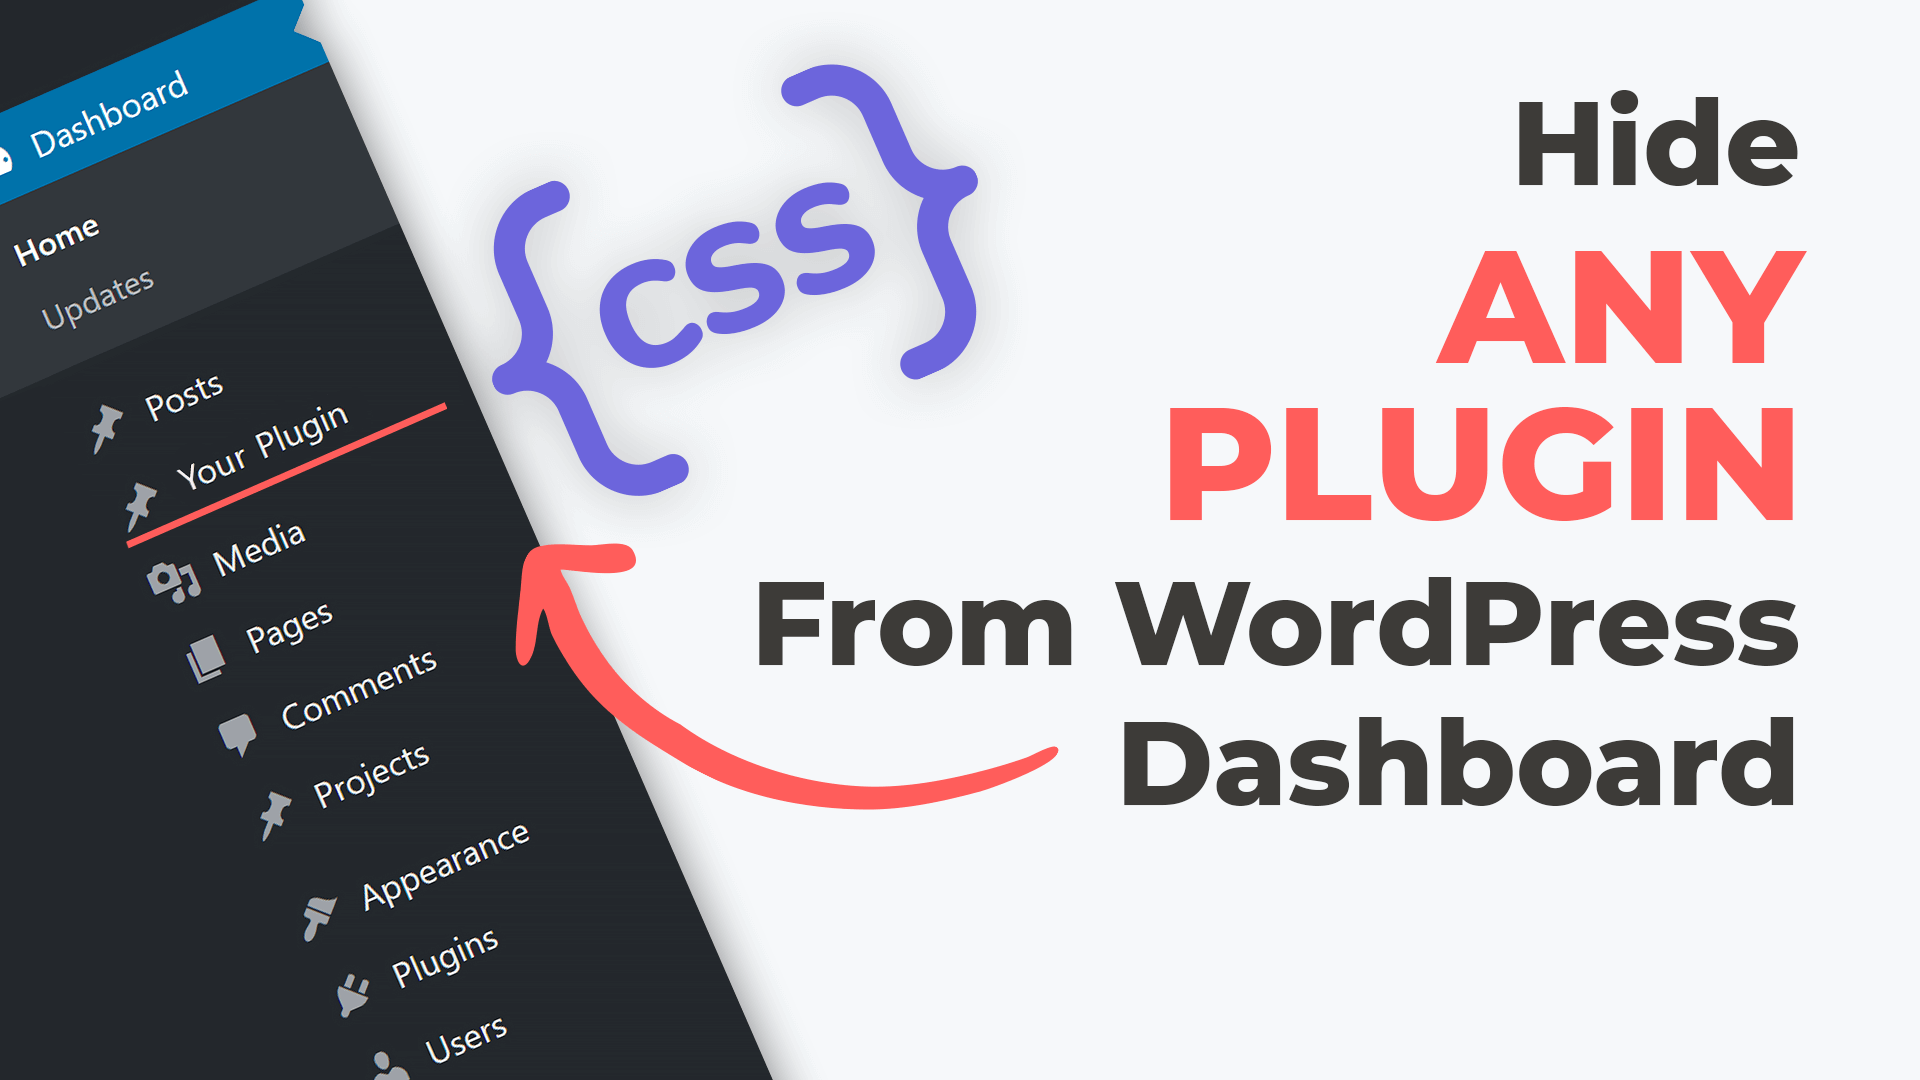 Hide Any Plugin from the WordPress Dashboard